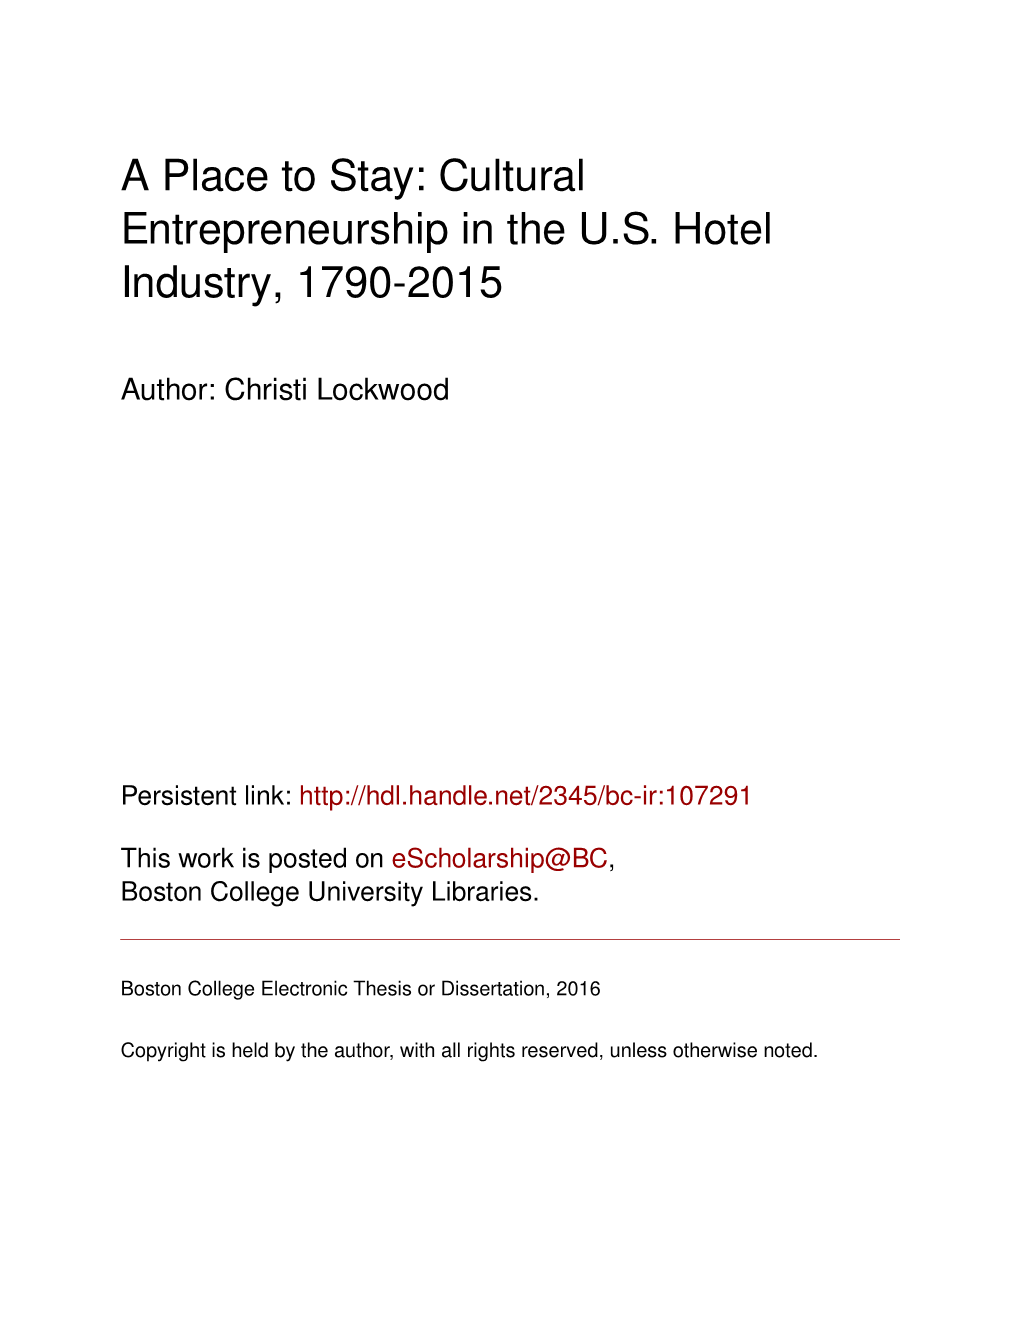 Cultural Entrepreneurship in the US Hotel Industry, 1790-2015